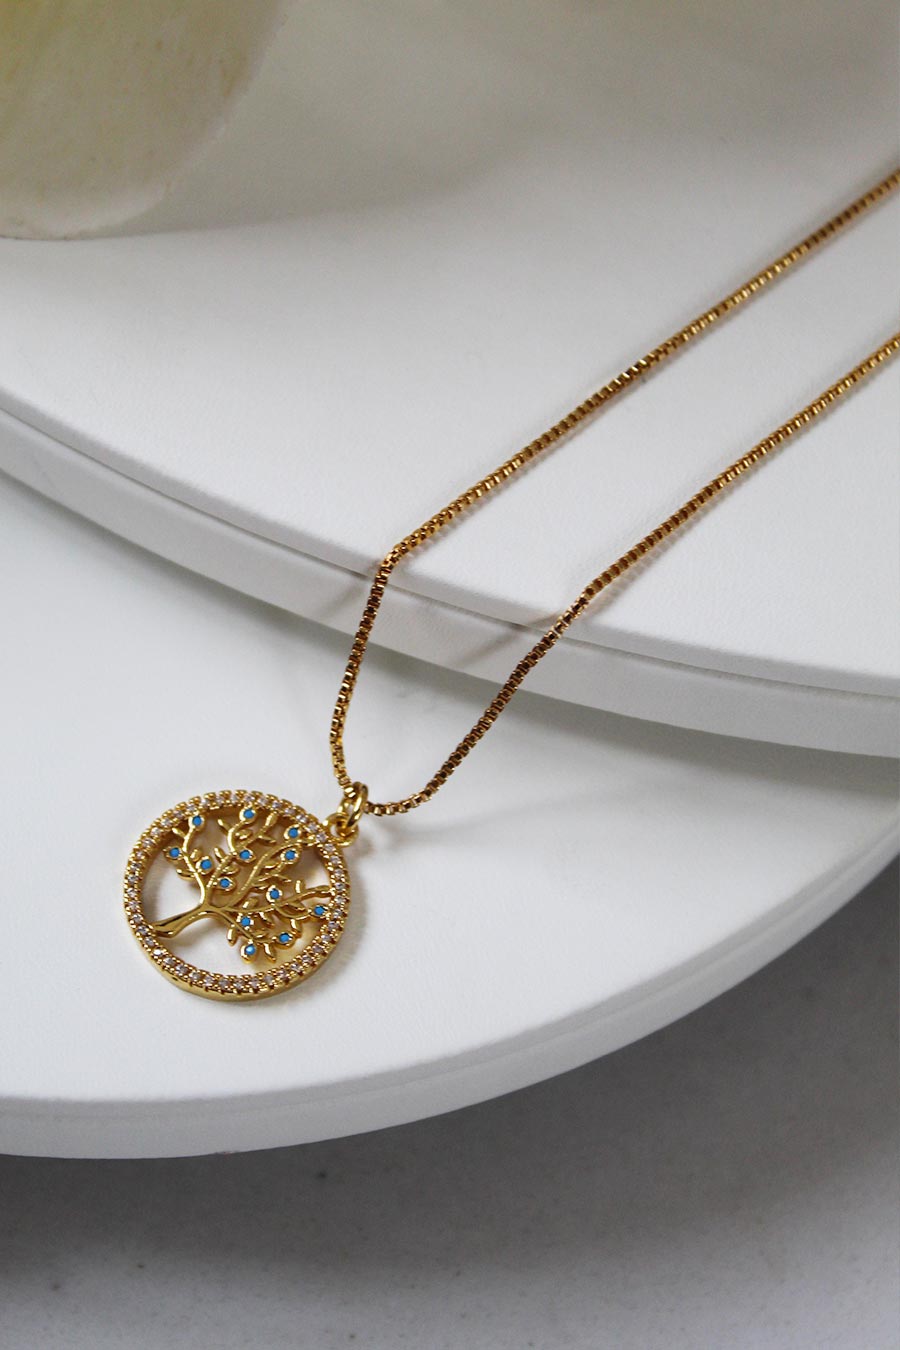 Gold Plated Tree of Life Necklace